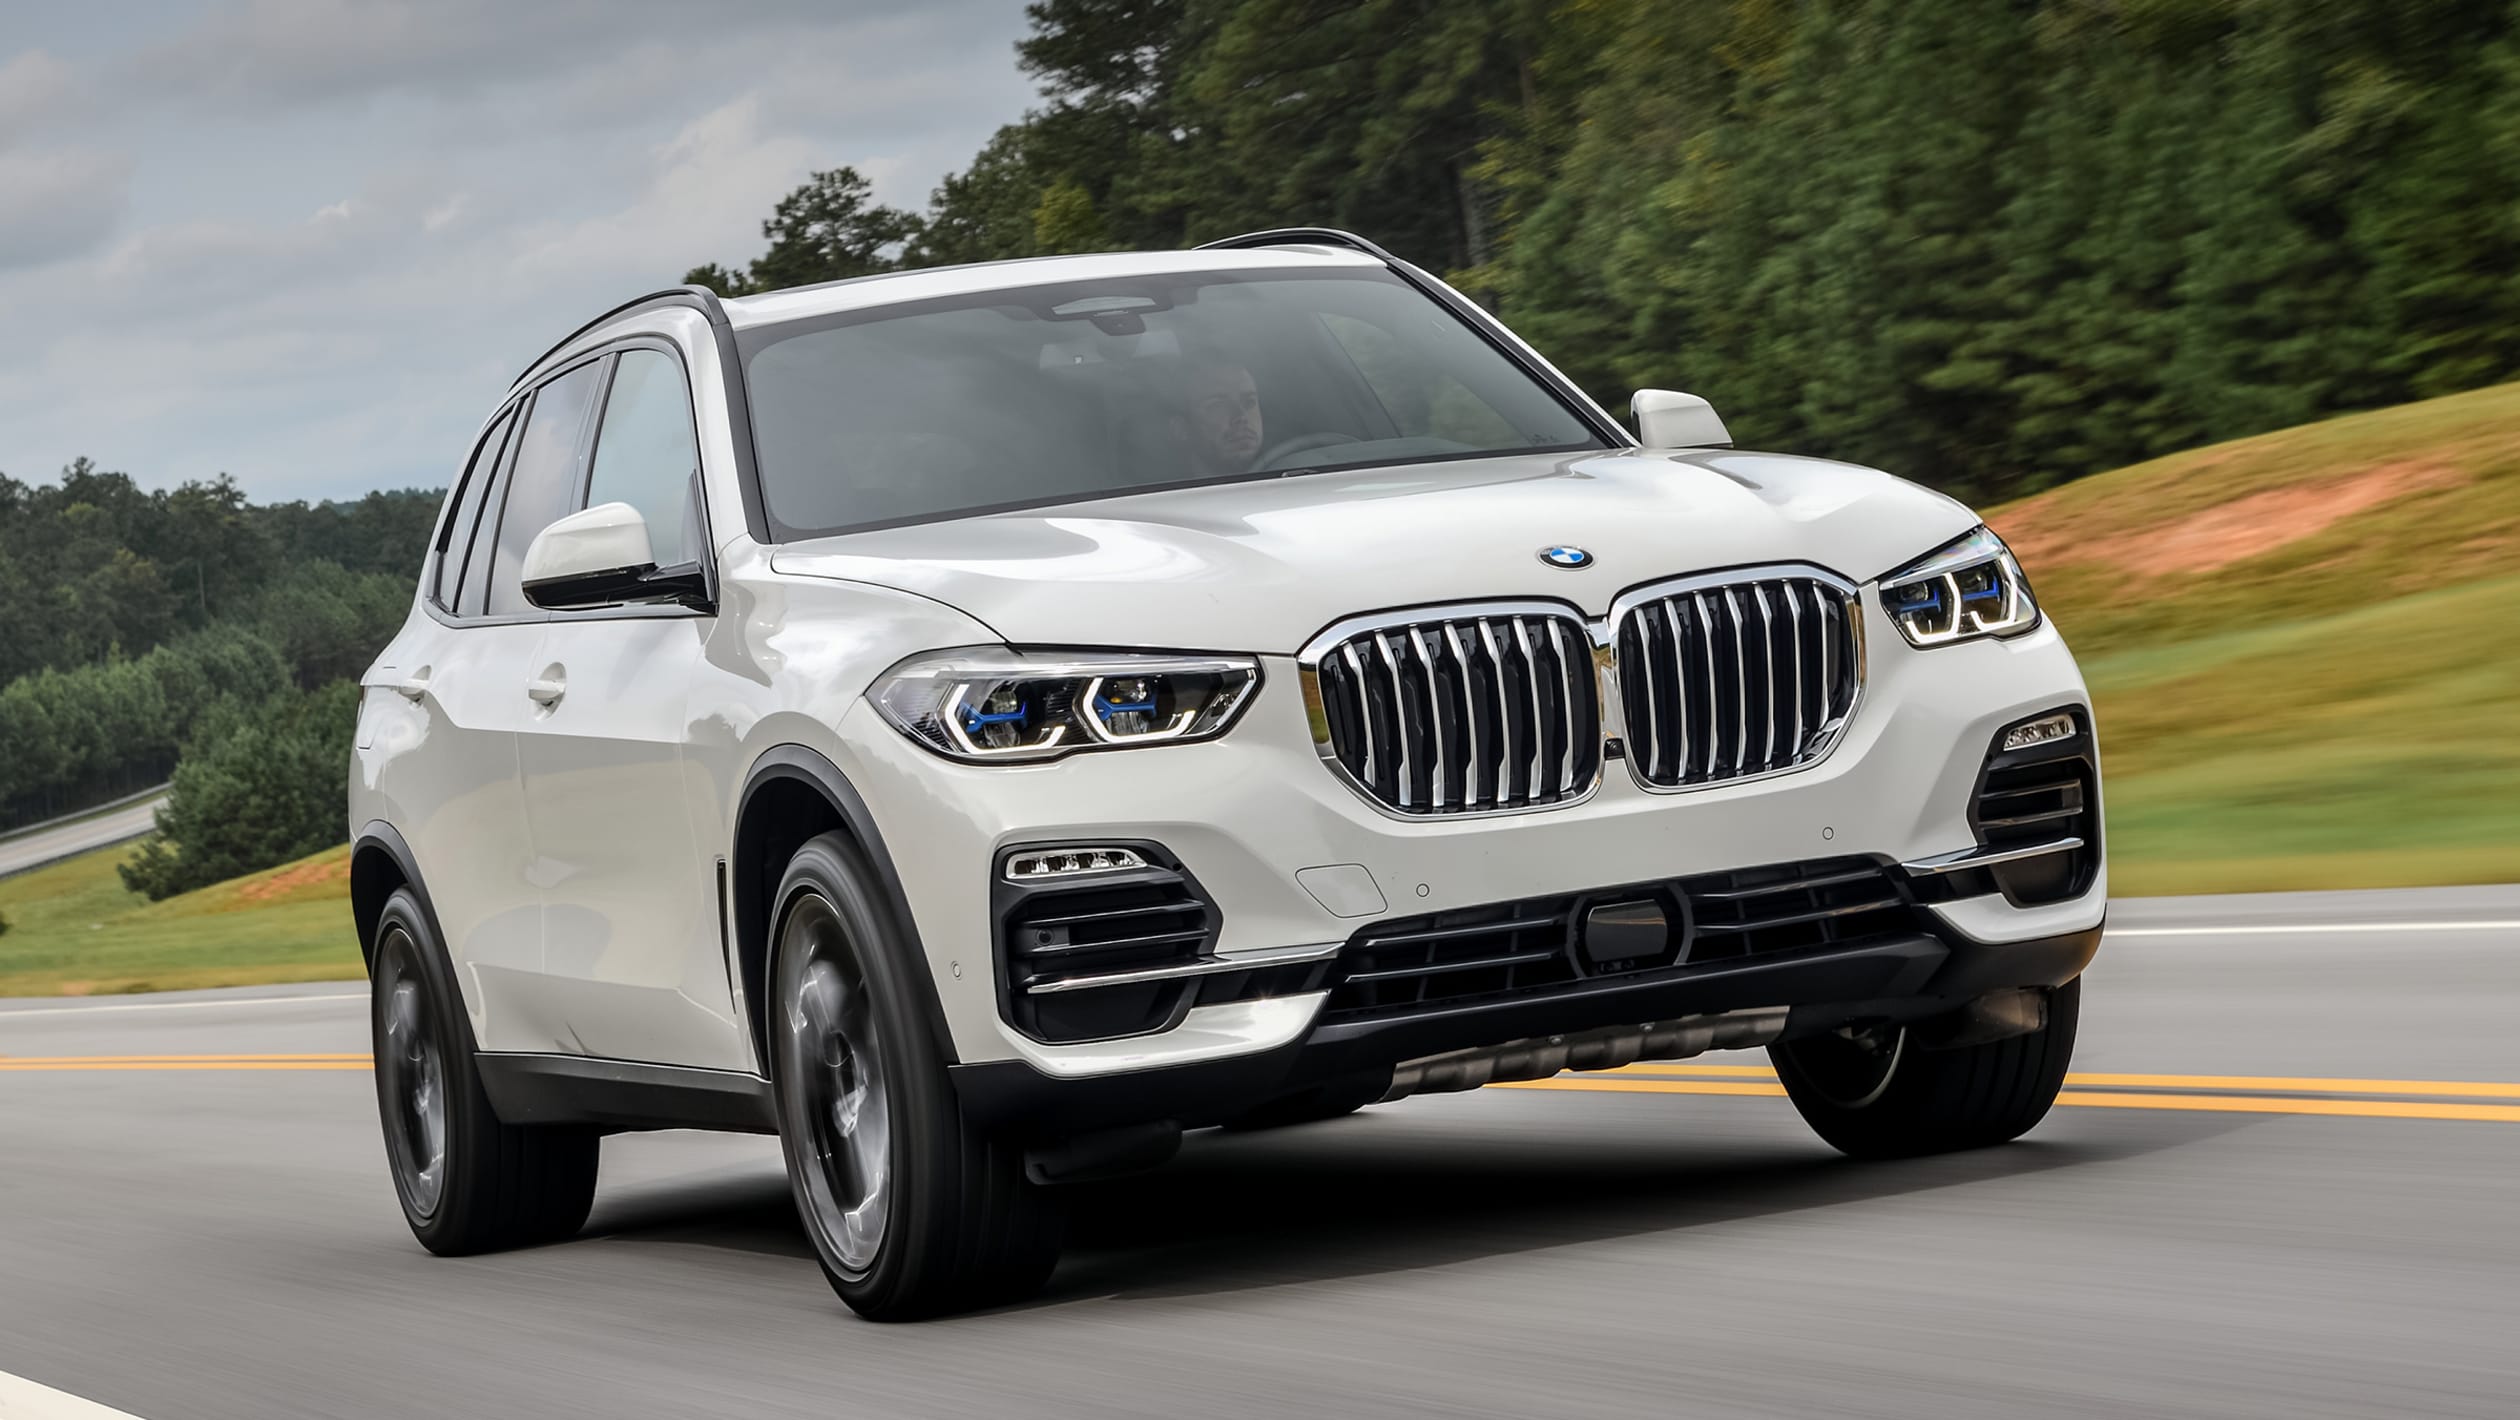 BMW X5 SUV MPG, running costs & CO2 2020 review Carbuyer